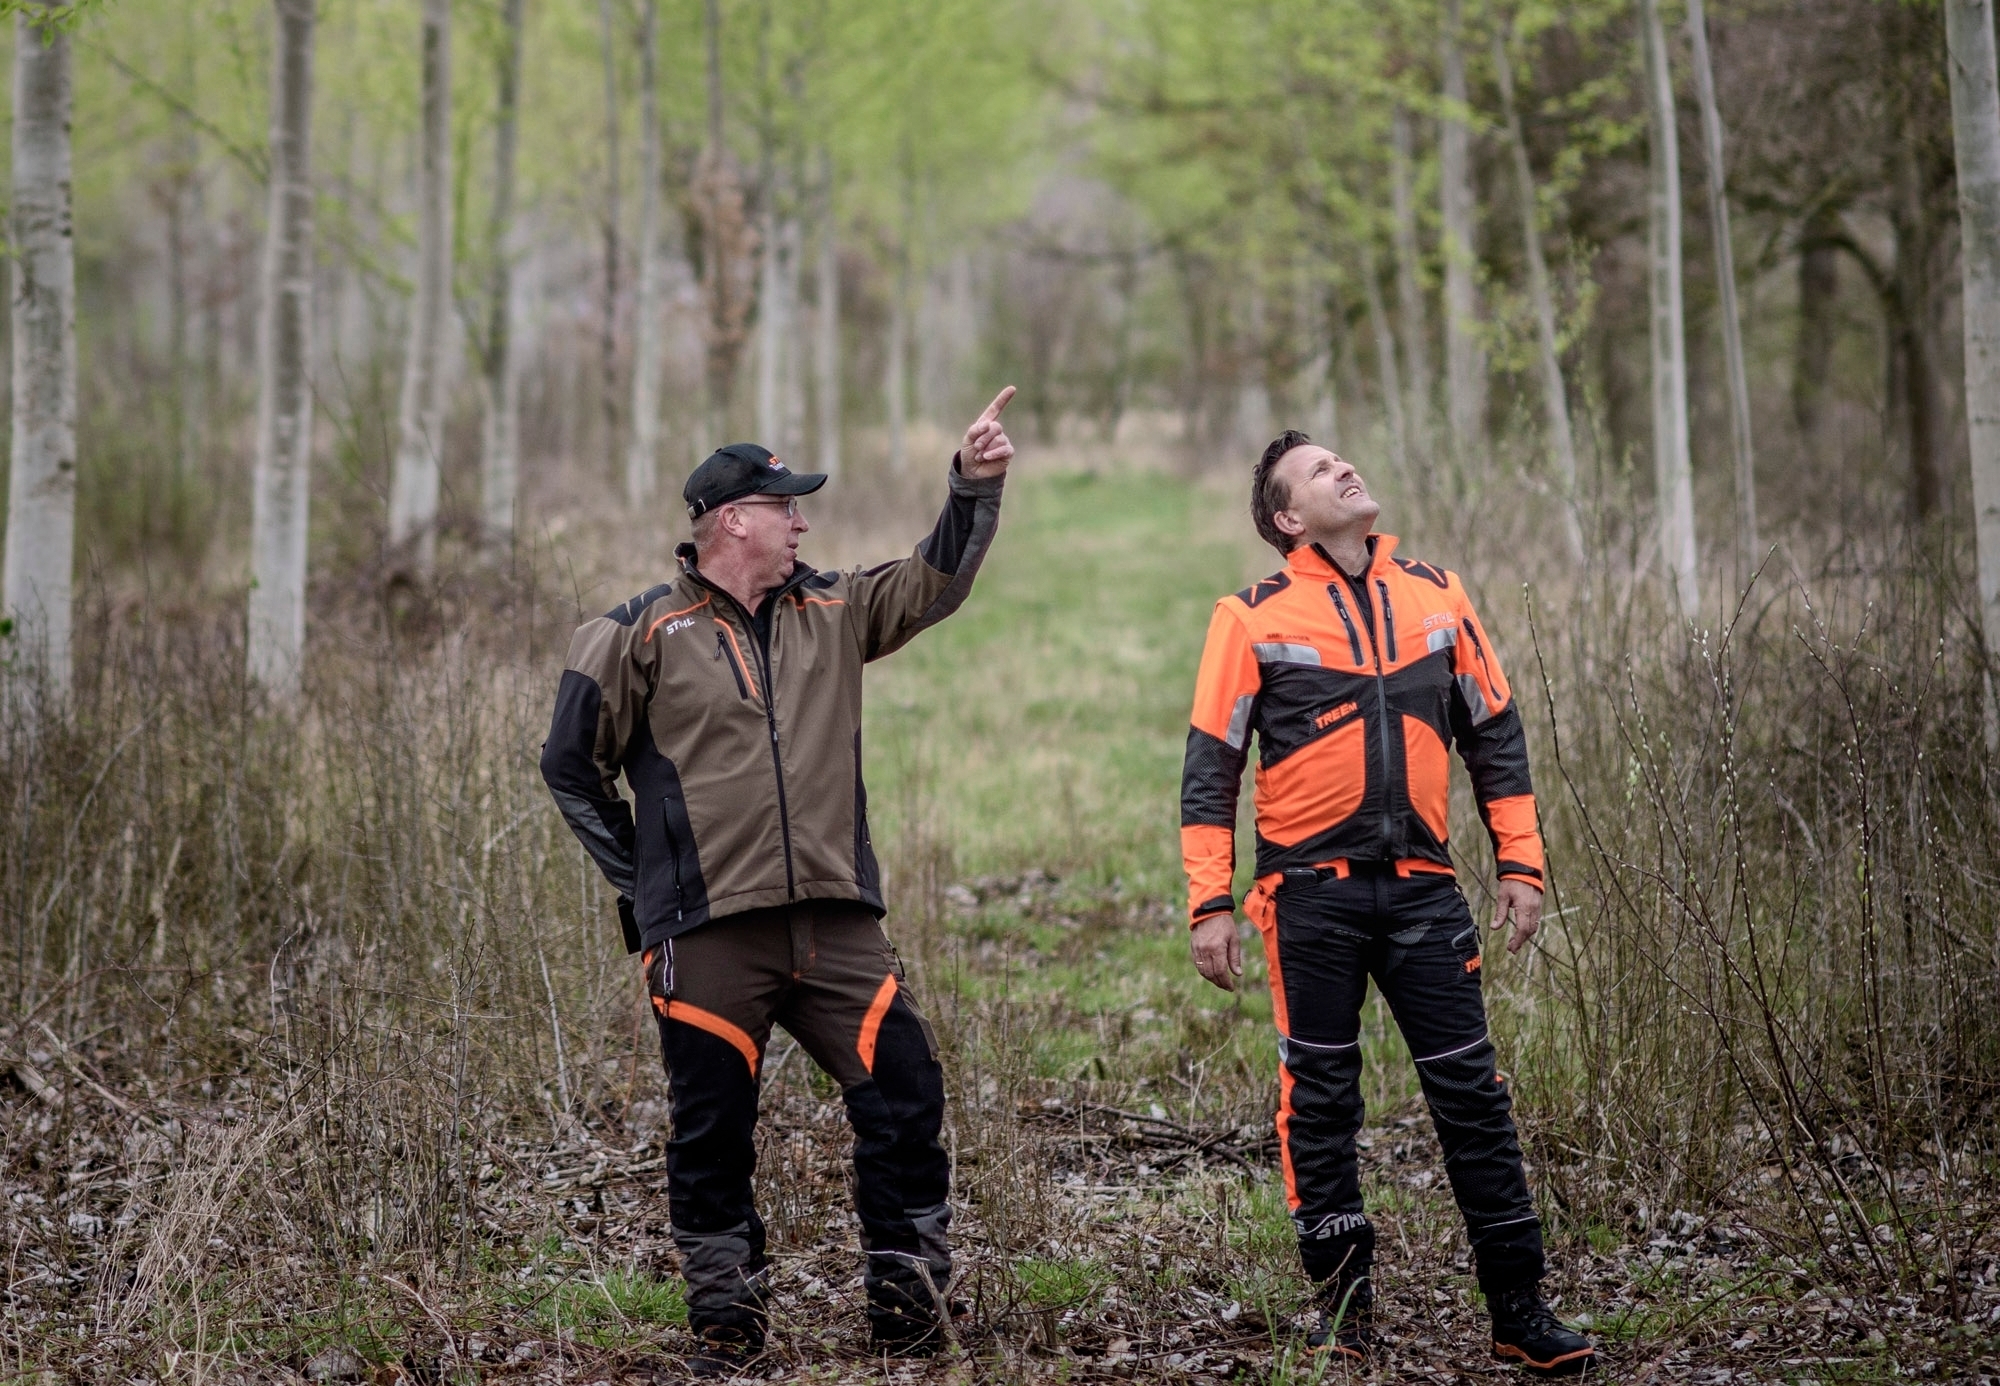 Wood Manager Bart Jansen (right) and Global Sports Director Spike Milton inspect the trees closely before felling to ensure the quality of the competition wood and fair contests.